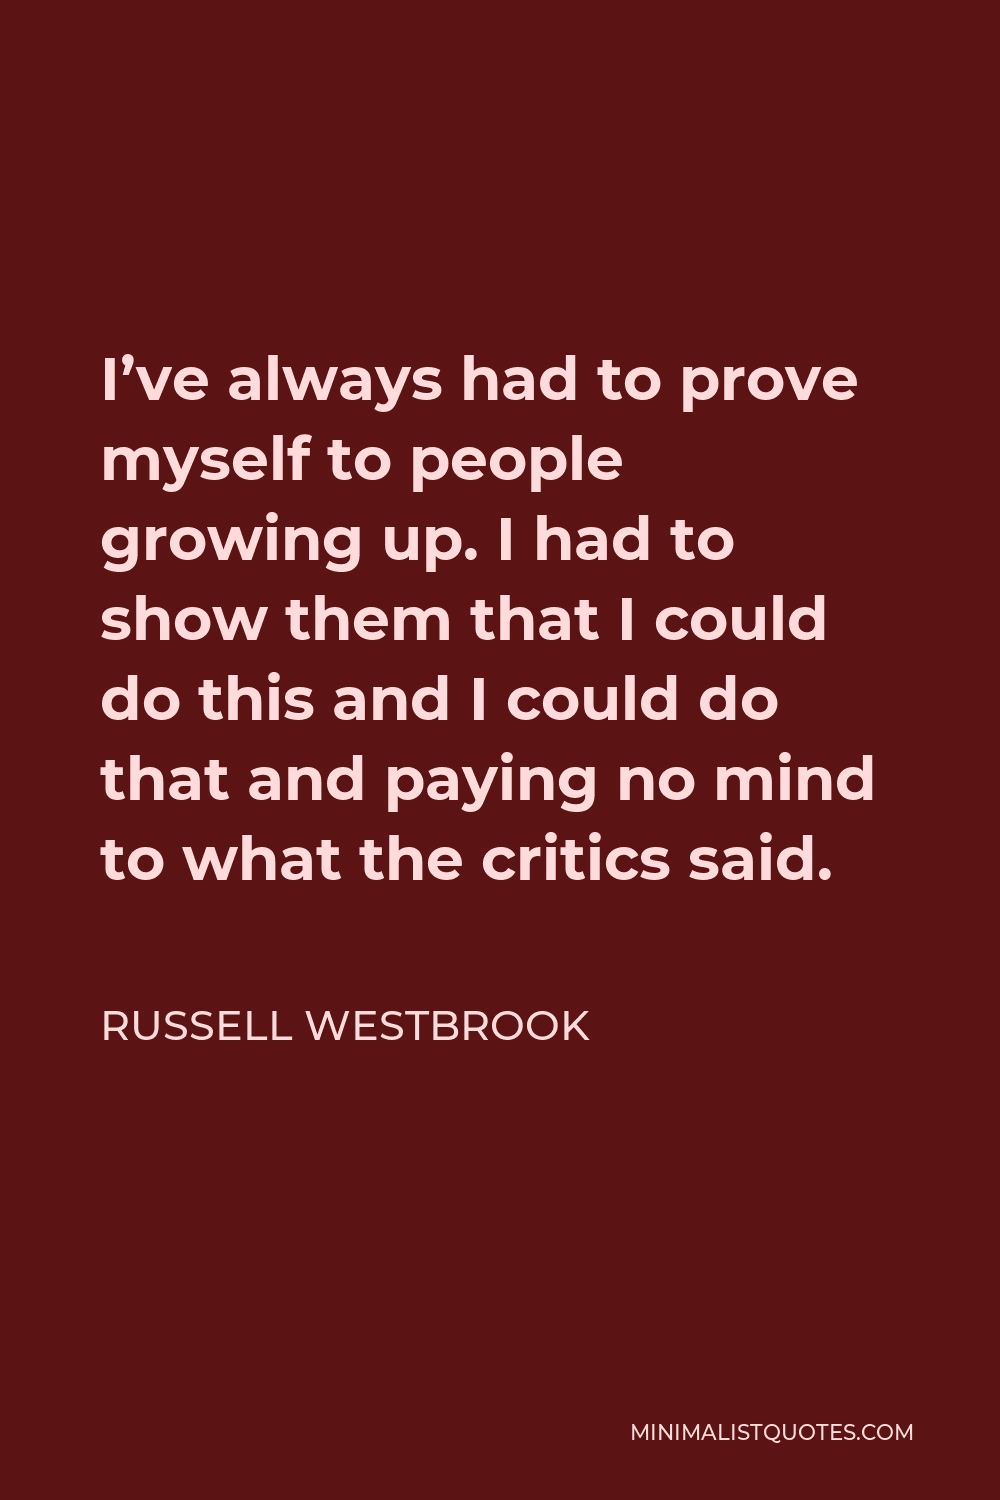 Russell Westbrook Quote - I’ve always had to prove myself to people growing up. I had to show them that I could do this and I could do that and paying no mind to what the critics said.